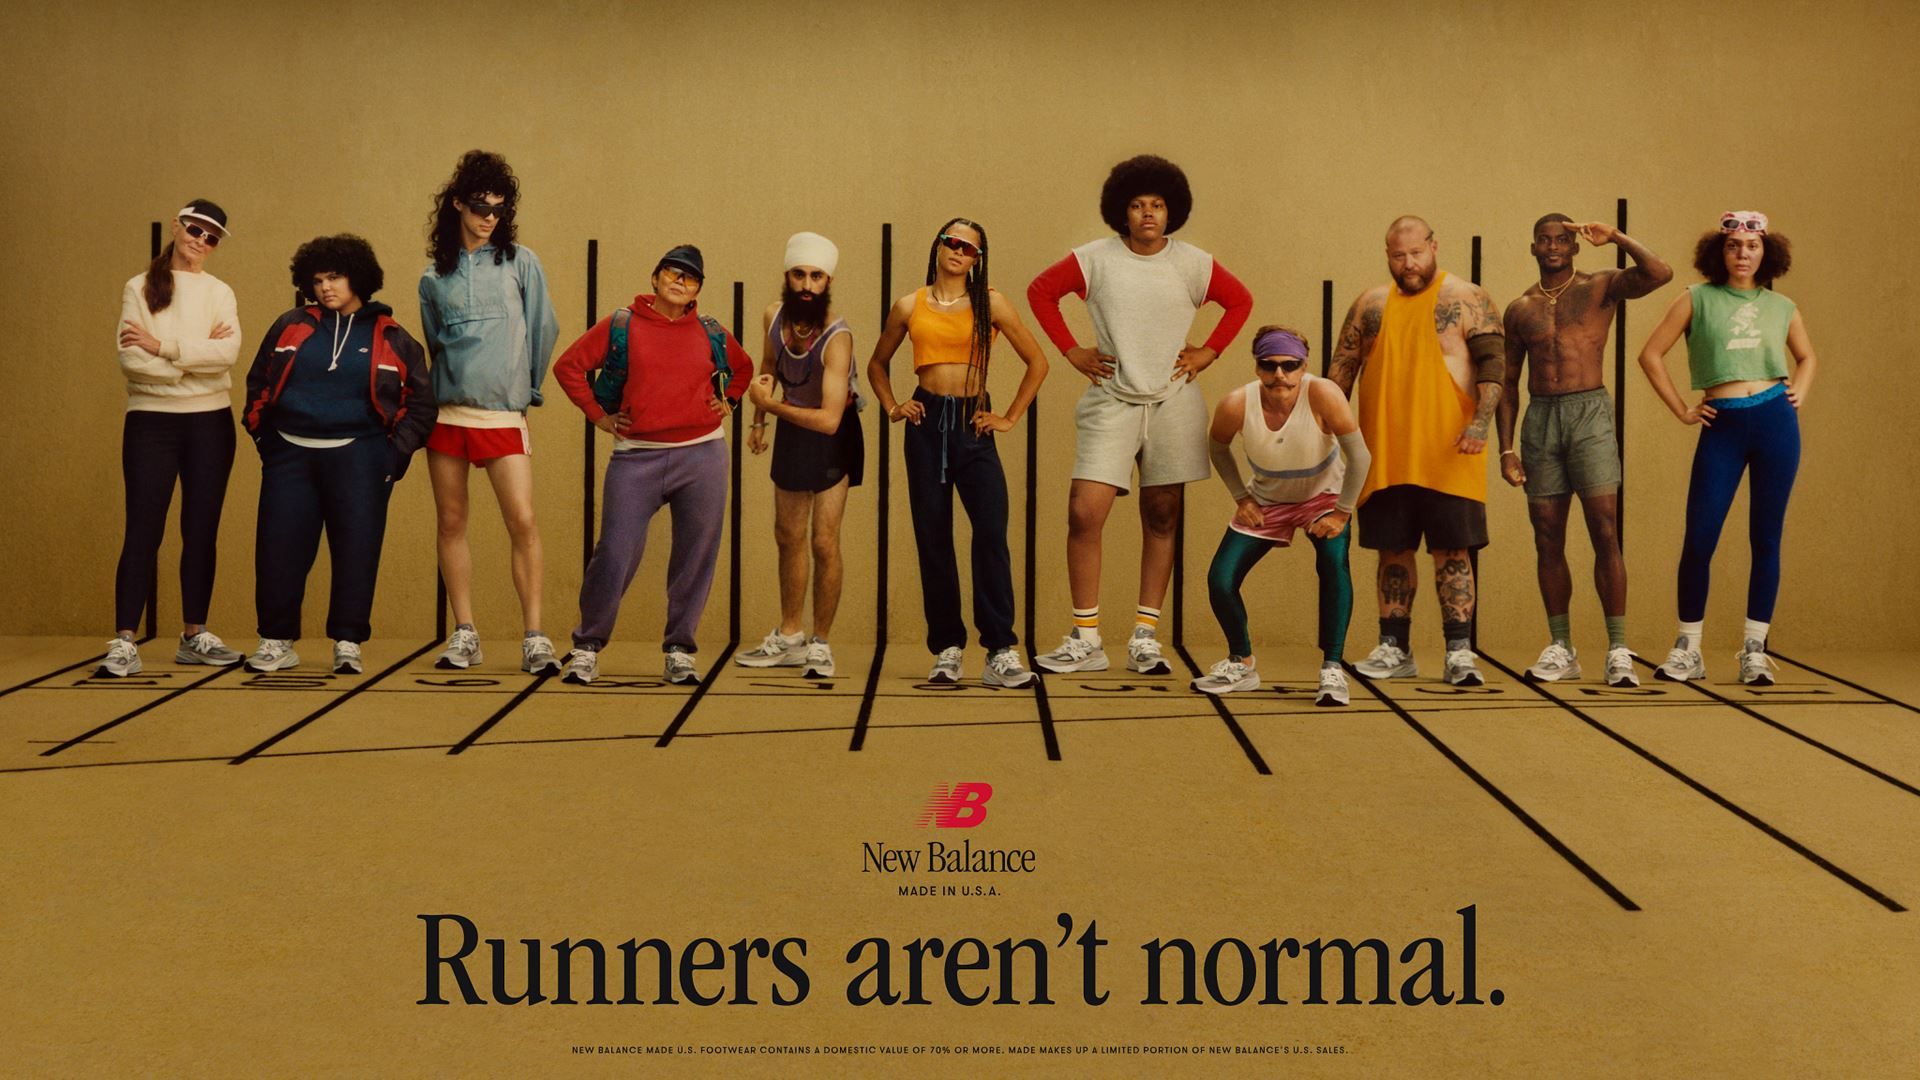 New Balance's latest campaign celebrates the diversity of runners. - New Balance